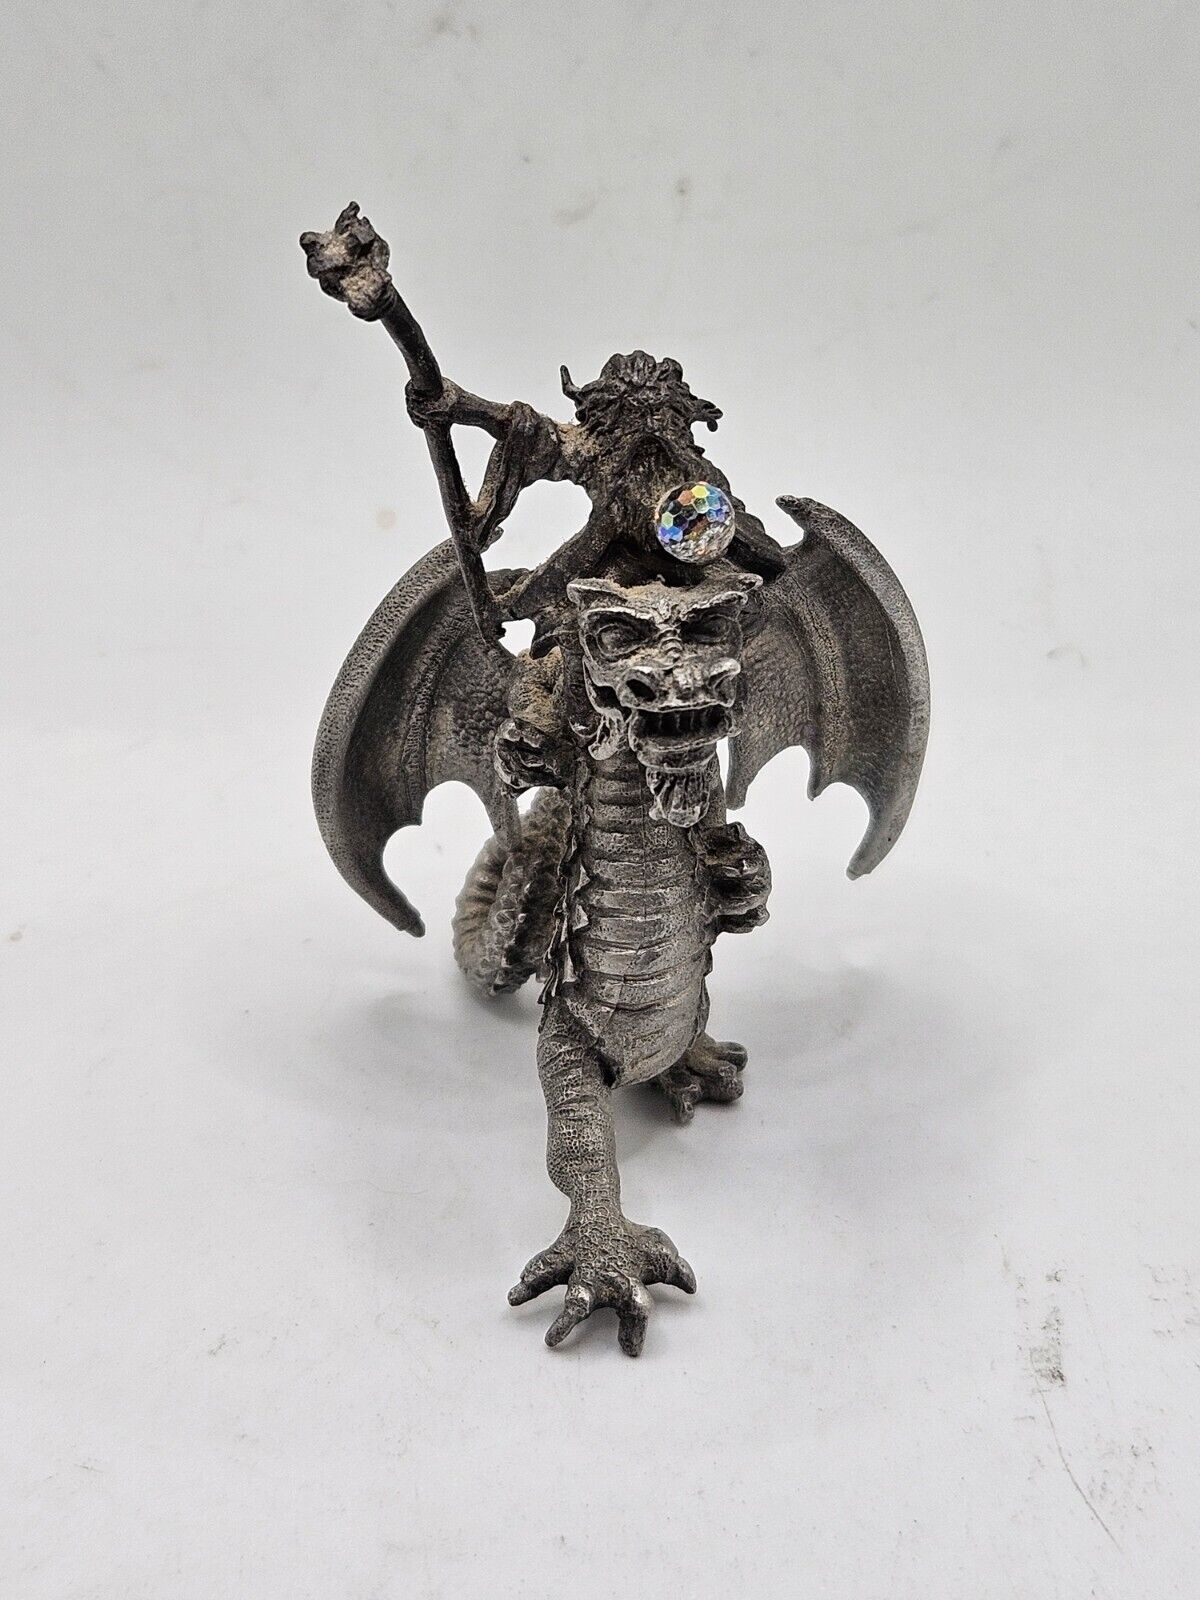 Vintage Pewter Wizard With Crystal Ball Riding Dragon Figurine